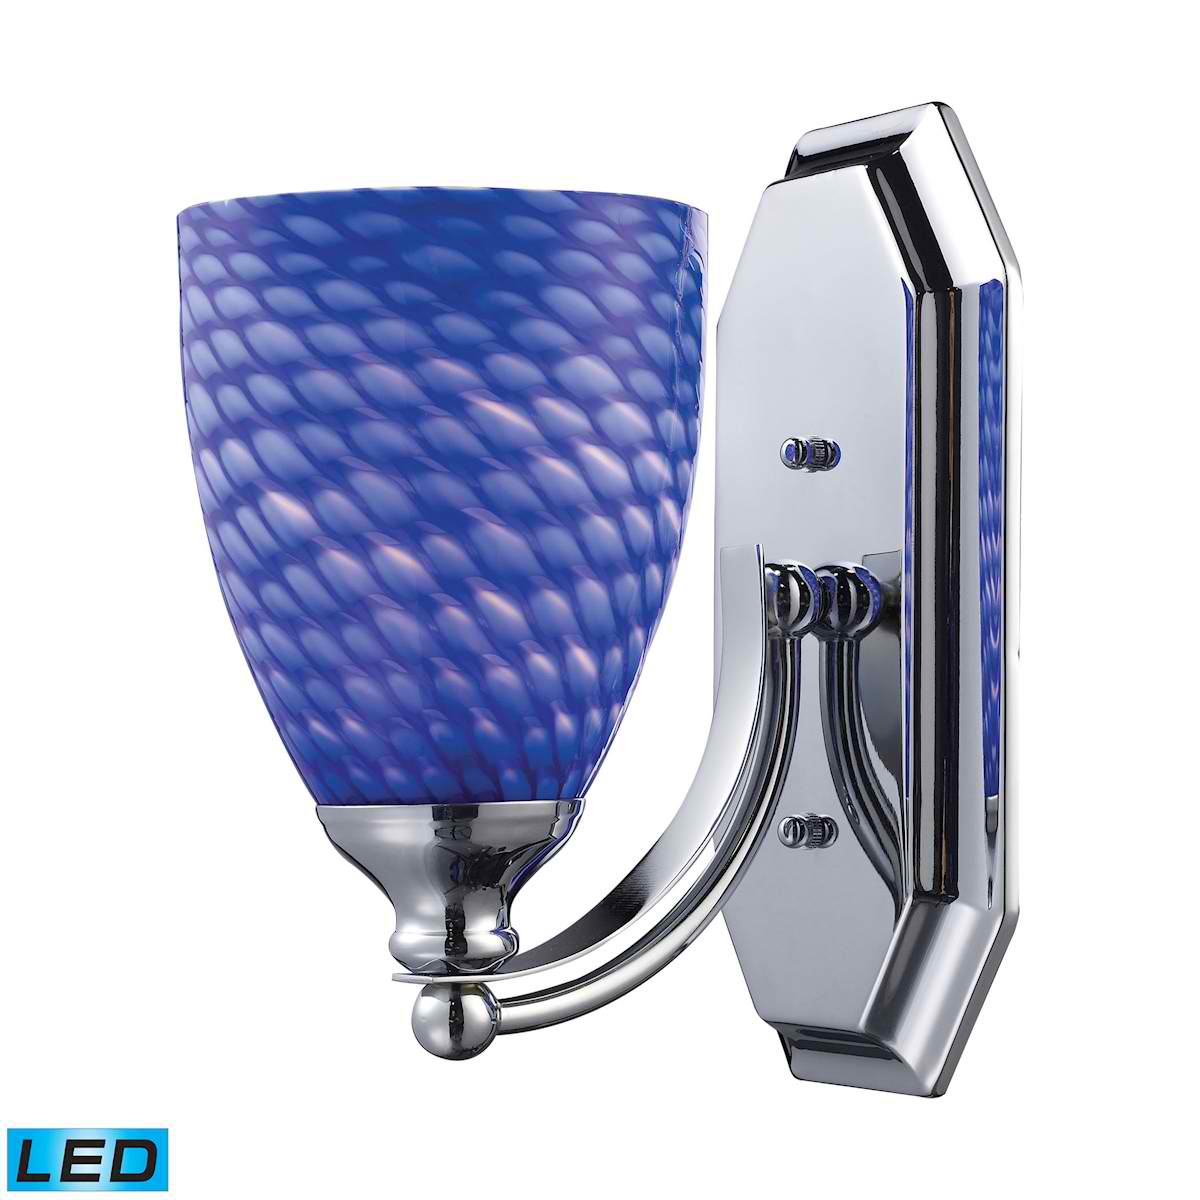 1 Light Vanity in Polished Chrome and Sapphire Glass - LED Offering Up To 800 Lumens (60 Watt Equivalent)